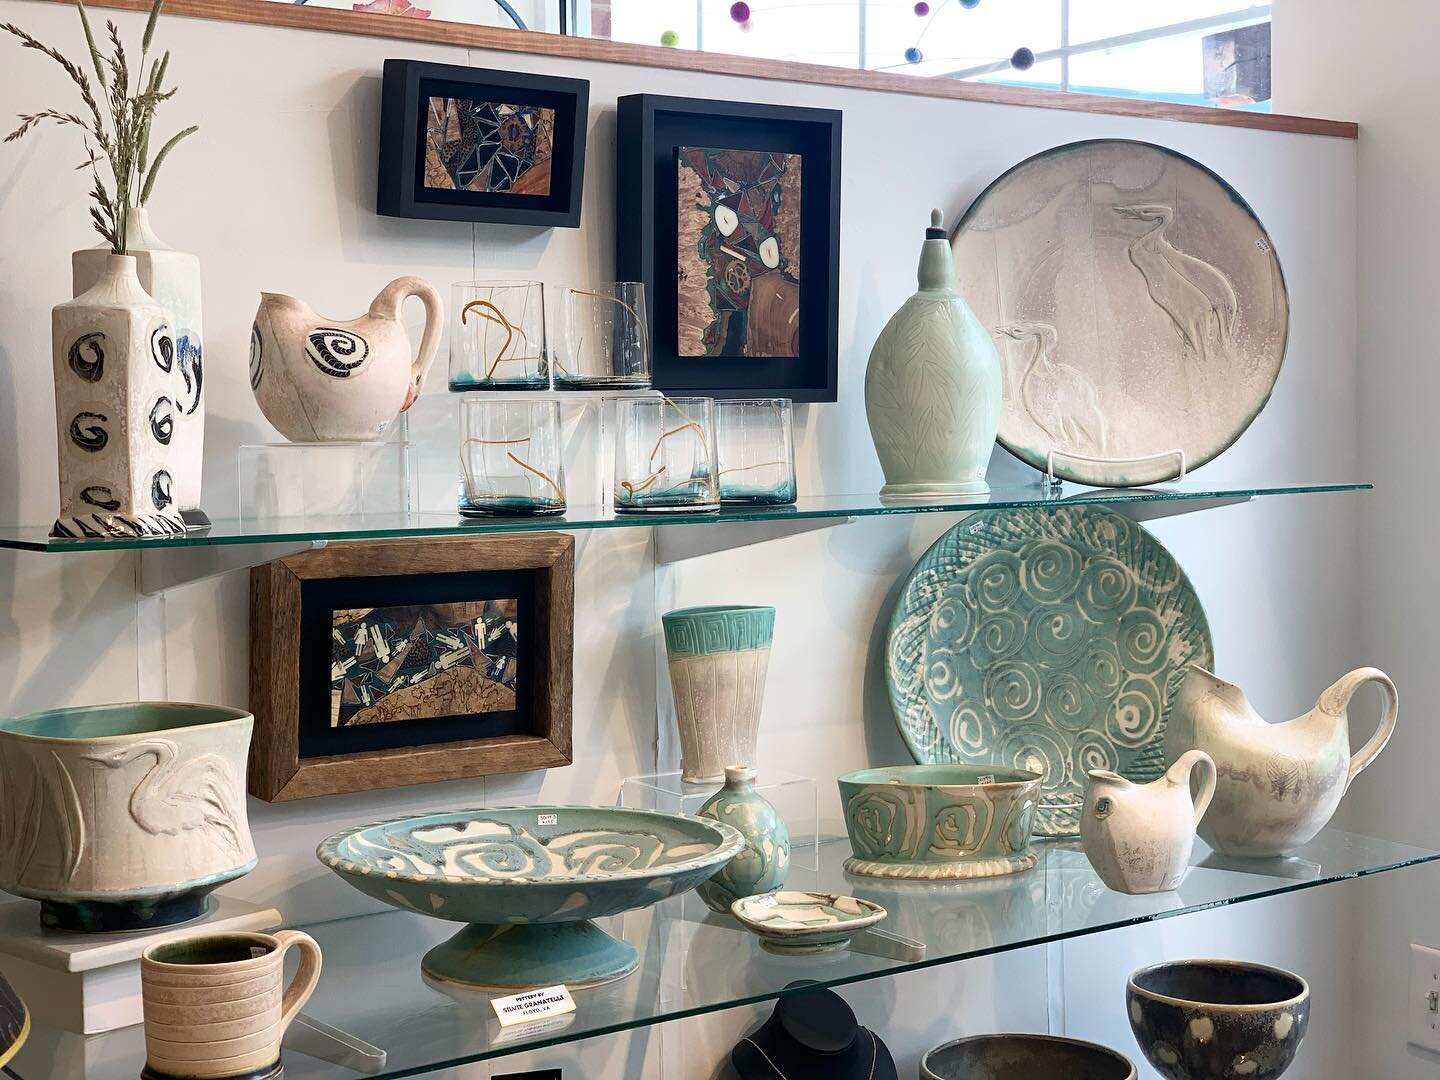 A beautiful display of Silvie Granatelli&rsquo;s pottery with hand blown glasses by Stephanie McCune and inlaid wall hangings by Ed Barnes.
.
.
.
#finecraft #finecraftgallery #handcrafted